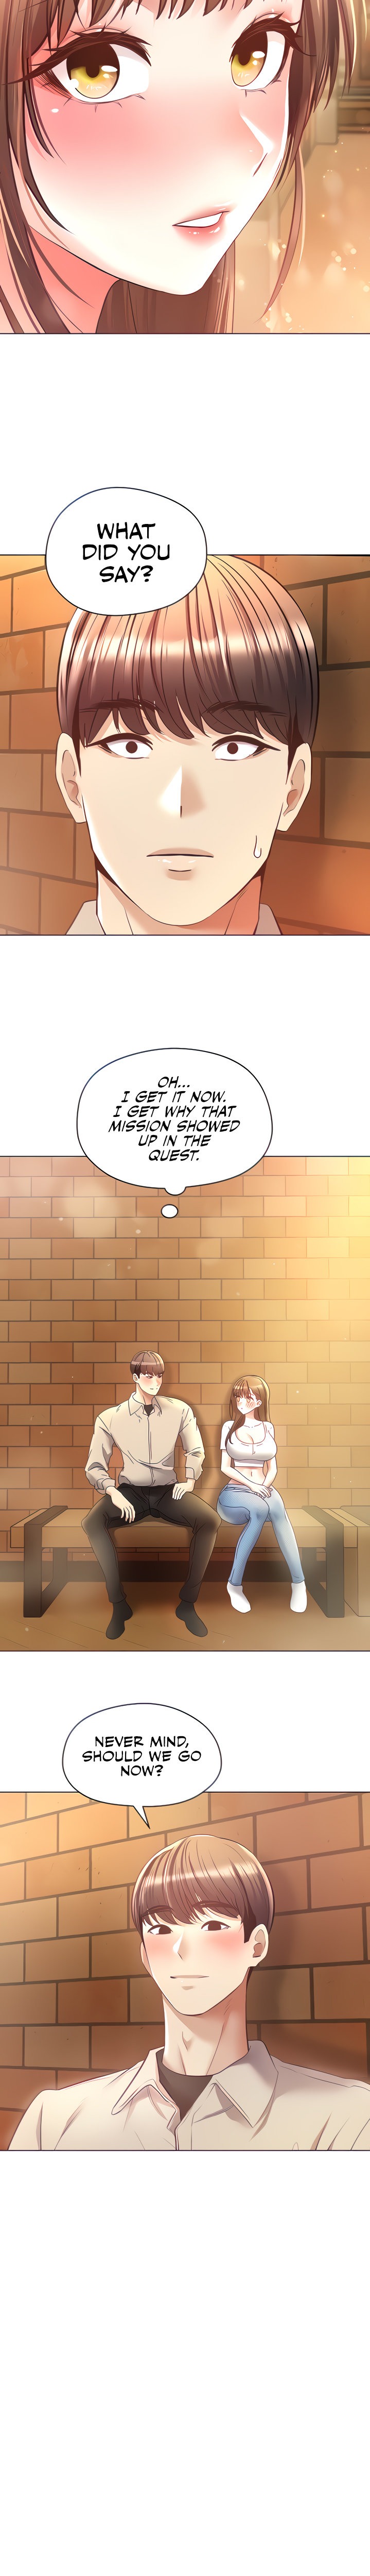 Desire Realization App - Chapter 16 Page 6